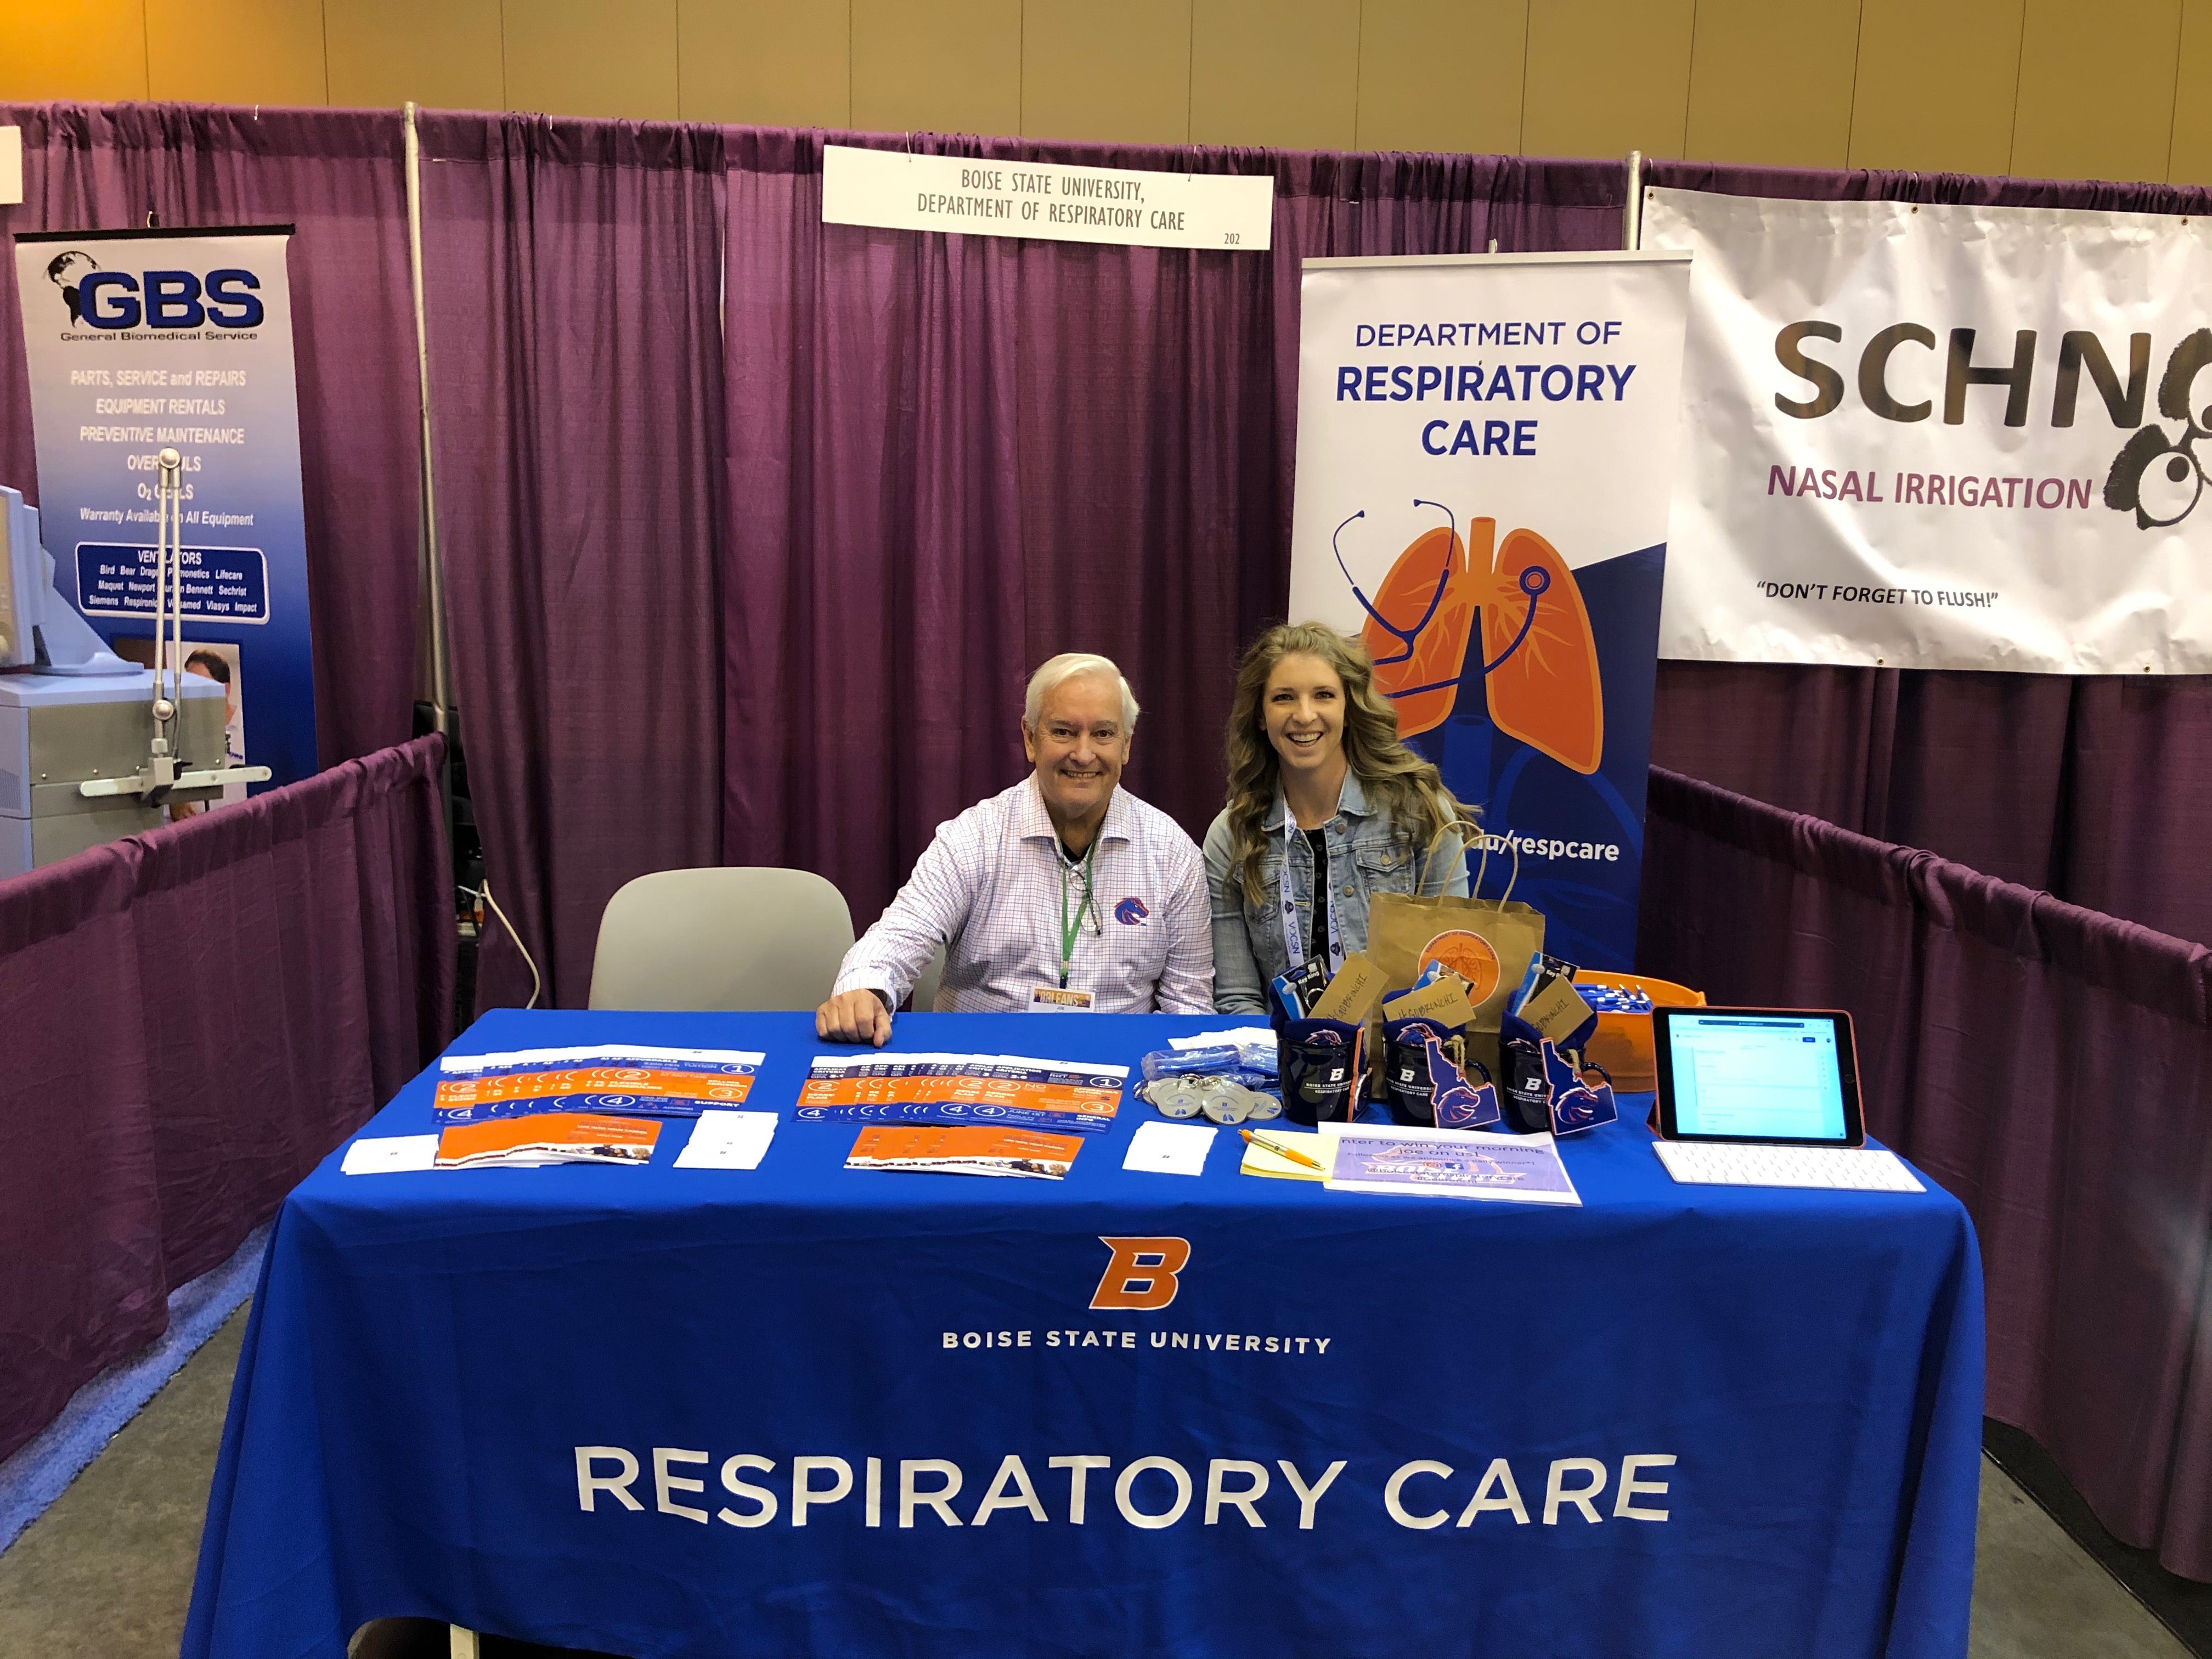 Faculty sitting at a table at the event that reads "Respiratory Care" 